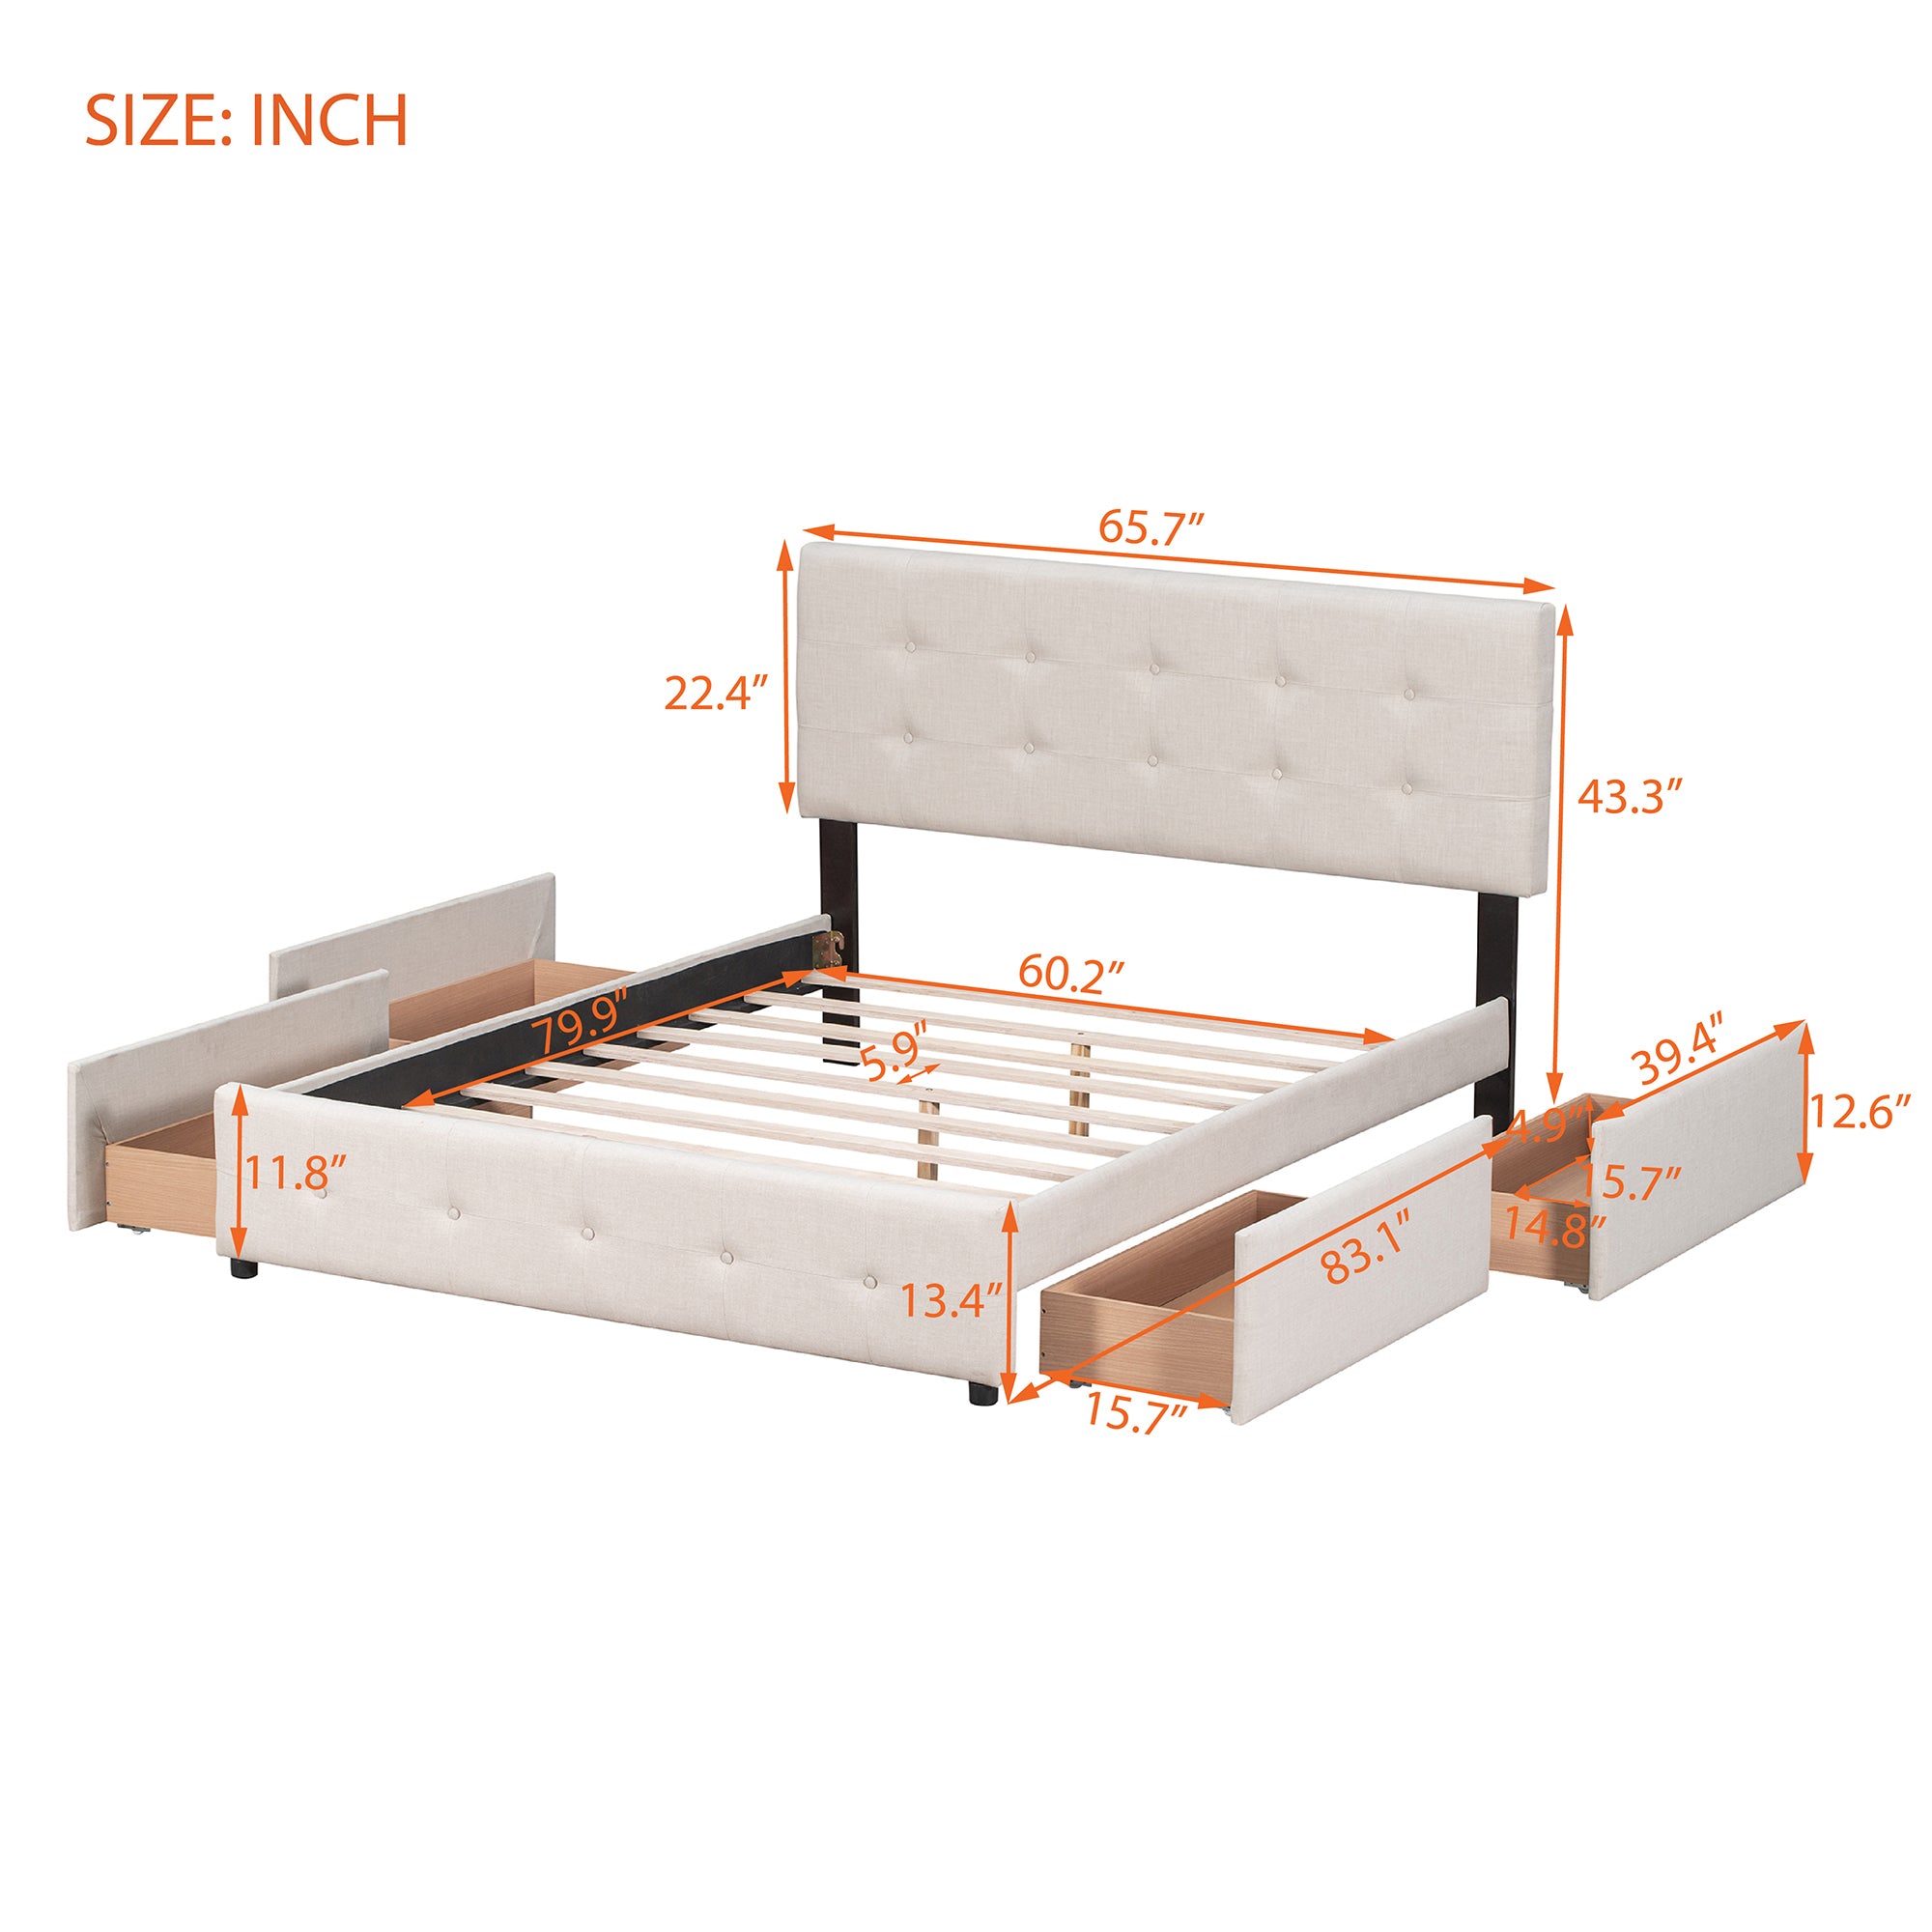 Queen Bed with Classic Headboard and 4 Drawers - Beige